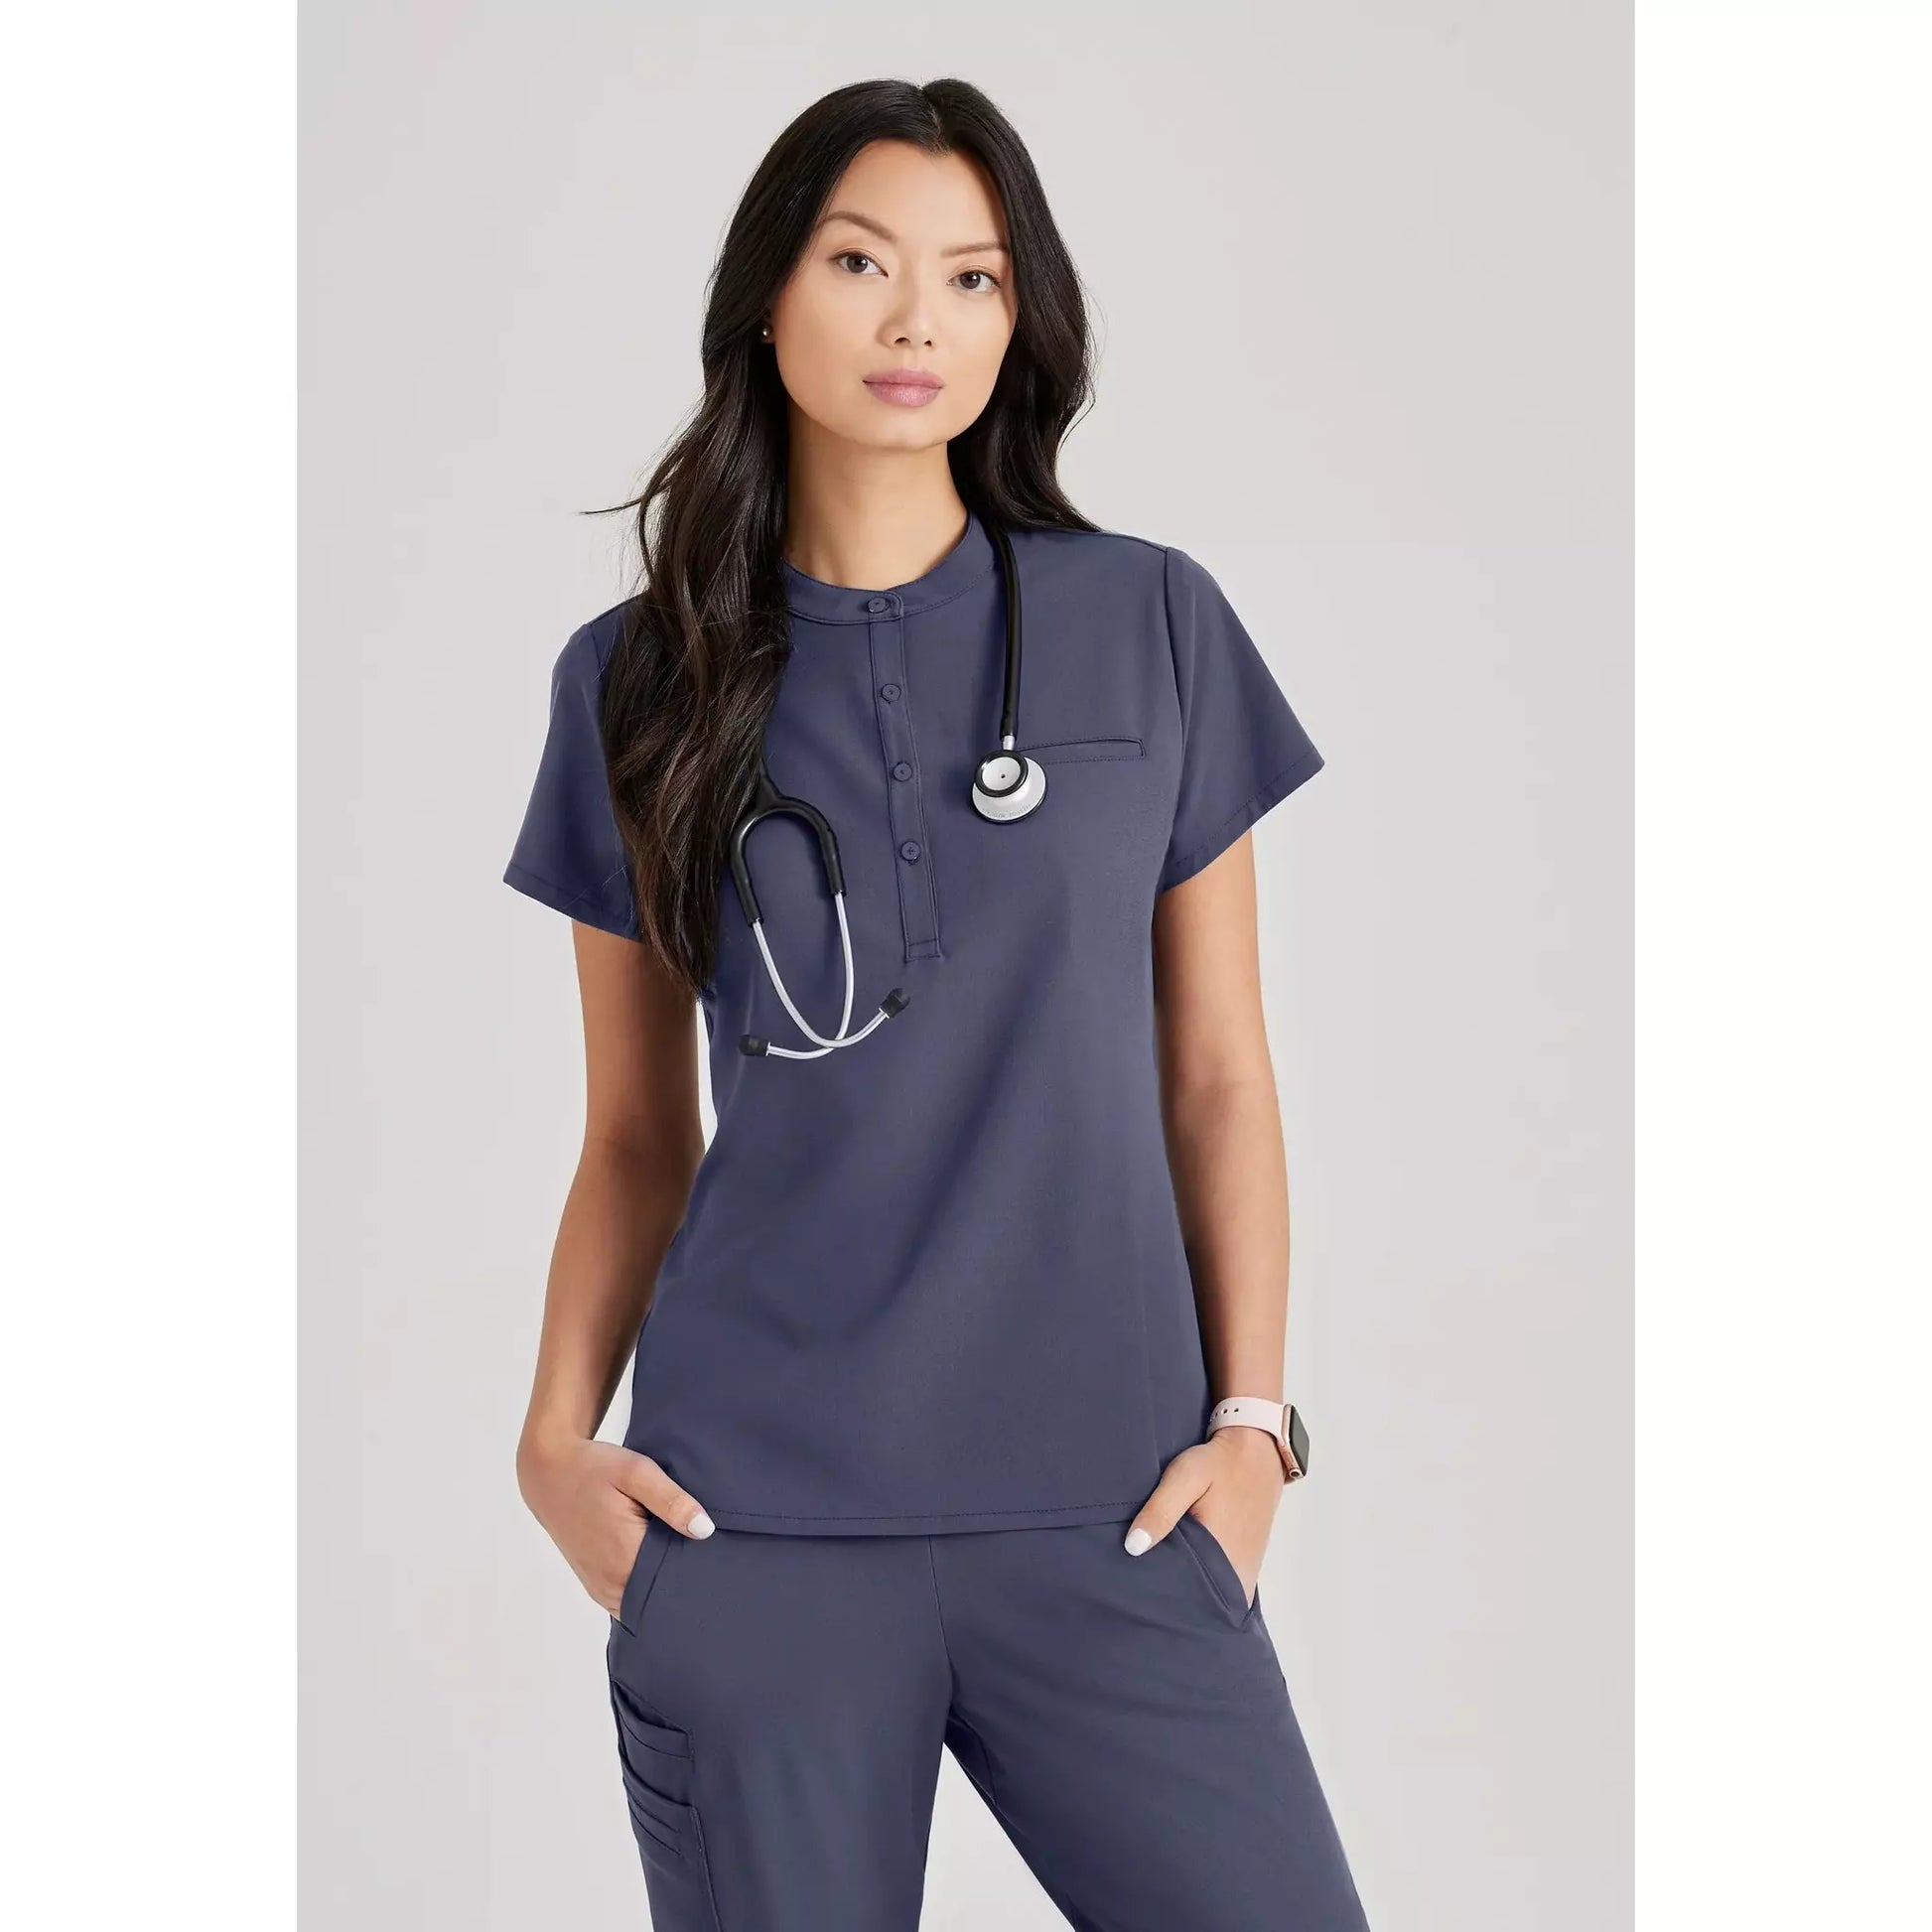 Barco Unify - Mission Tuck In Scrub Top Women's Scrub Top Barco Unify Steel XXS 